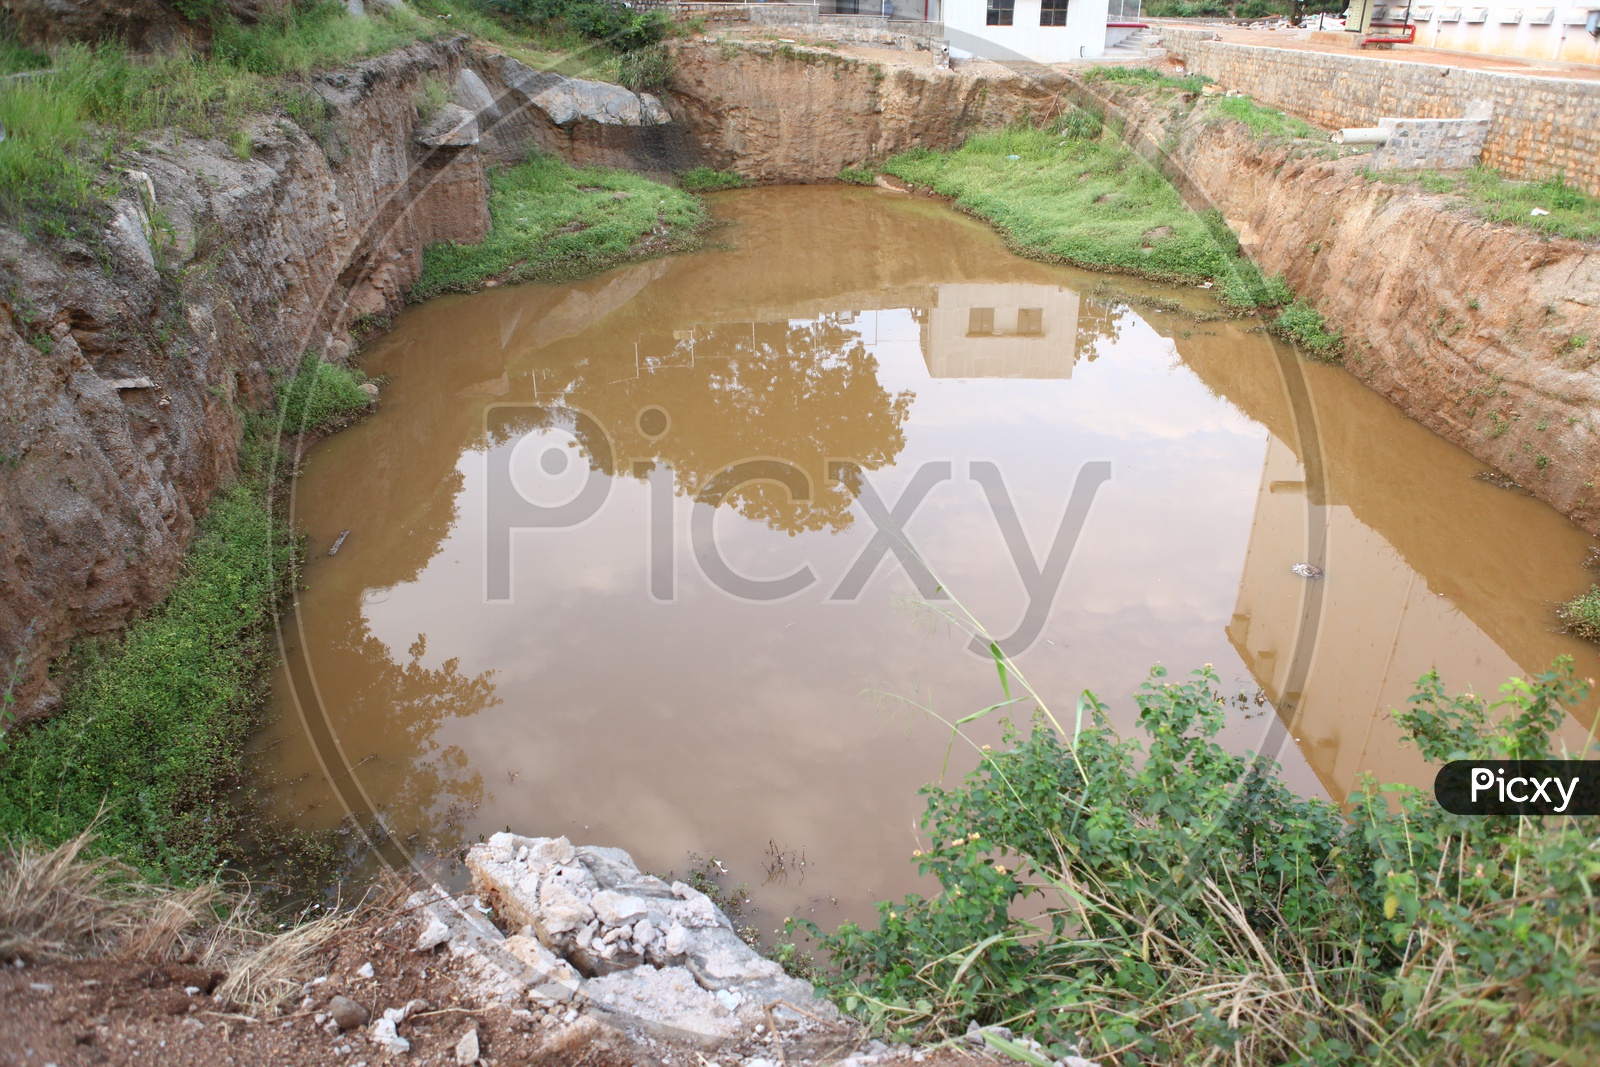 Excavated area filled with water